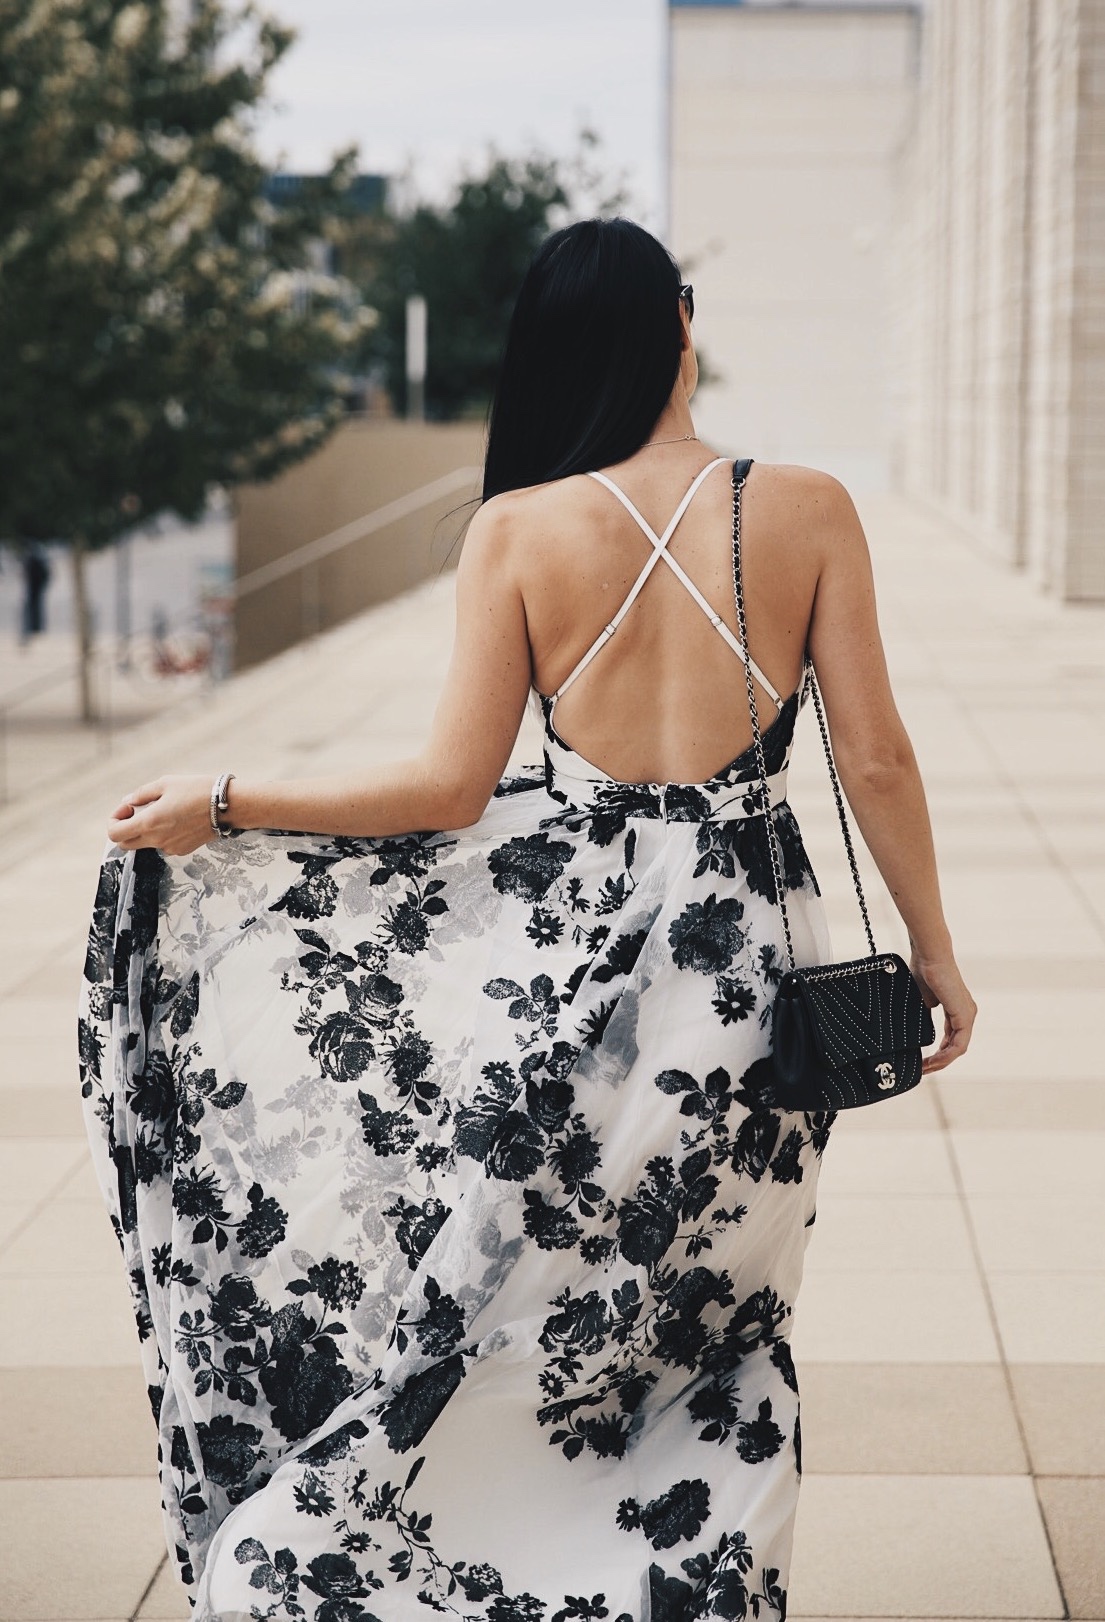 DTKAustin shares the most affordable black and white floral print maxi dress from Akira. Under $100 with a stunning criss-cross back it is perfect for date night. | how to wear a maxi dress | how to style a maxi dress | maxi dress style tips | summer fashion tips | summer outfit ideas | summer style tips | what to wear for summer | warm weather fashion | fashion for summer | style tips for summer | outfit ideas for summer || Dressed to Kill